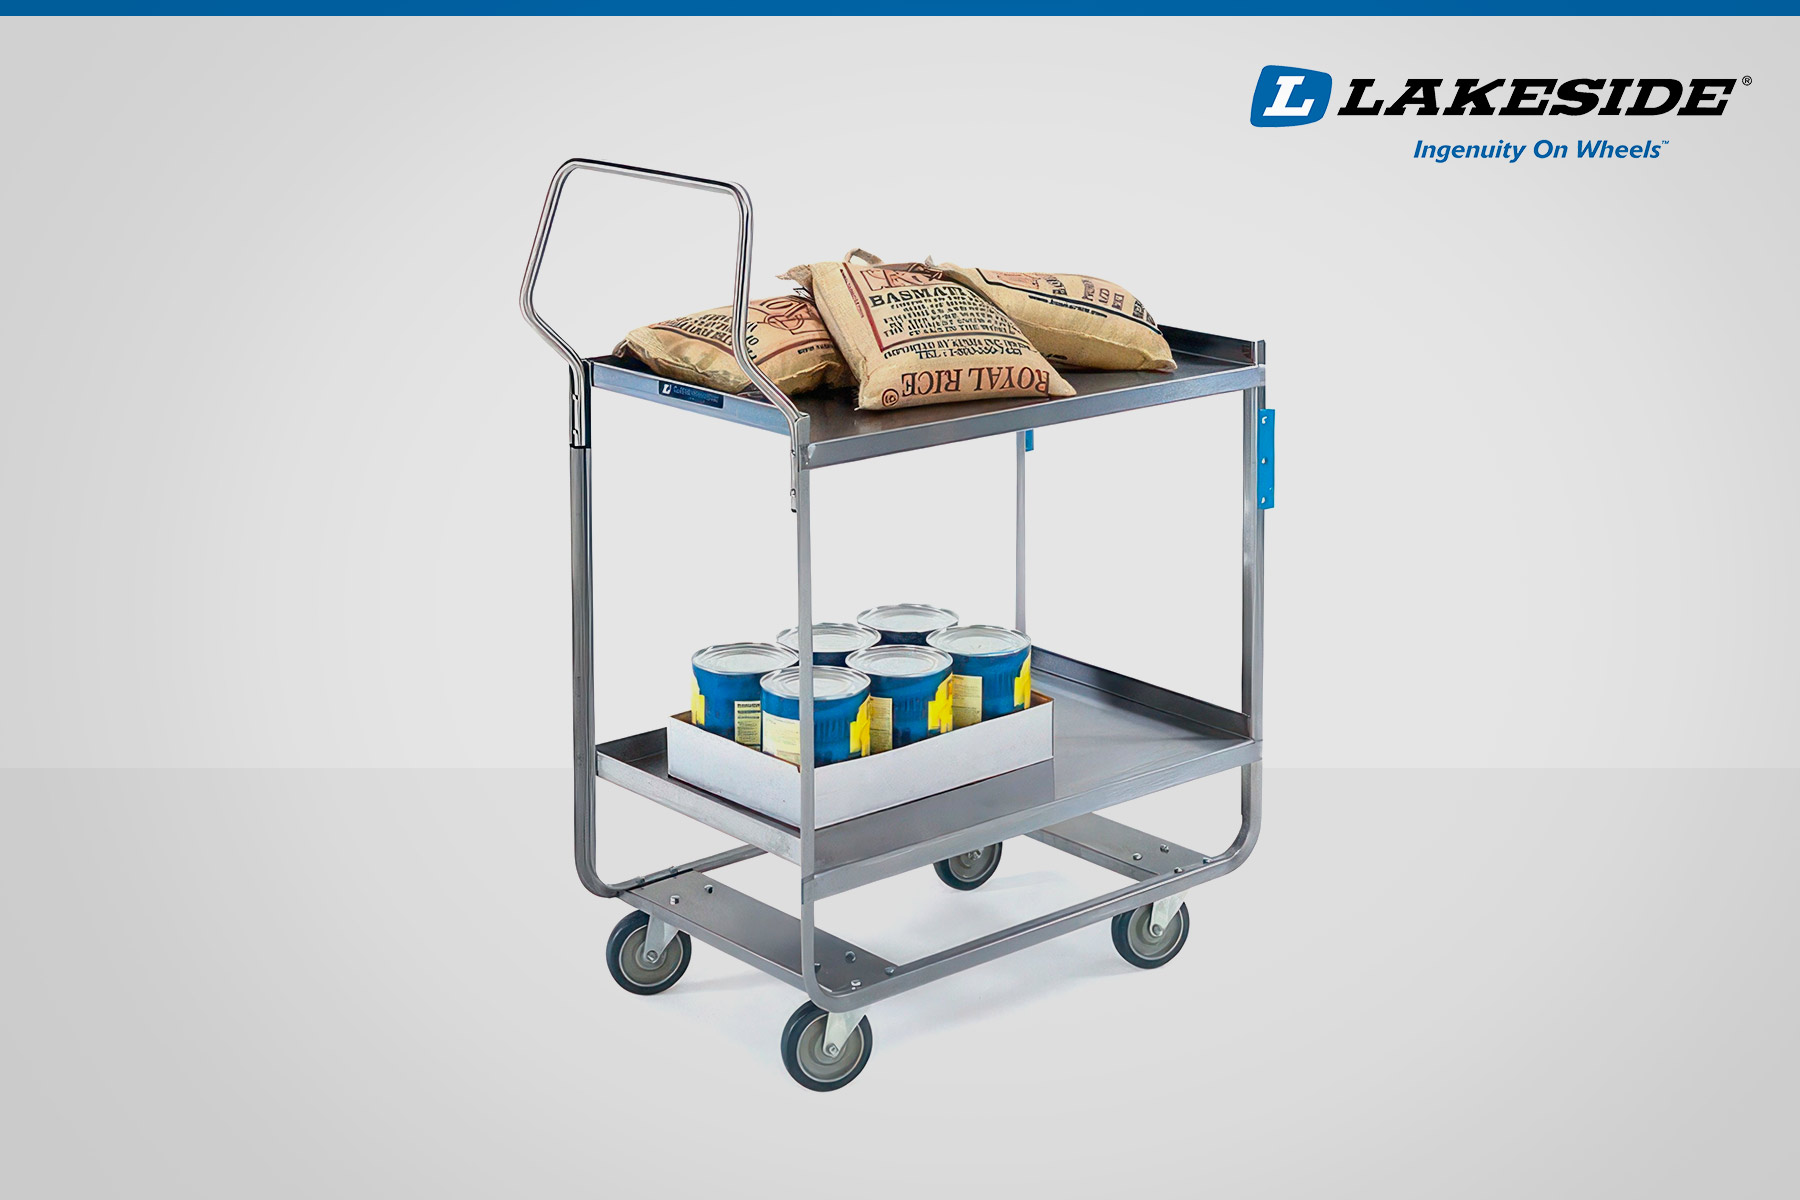 Lakeside's Heavy-Duty Cart which can transport up to 700 pounds for up to 12 hours a day